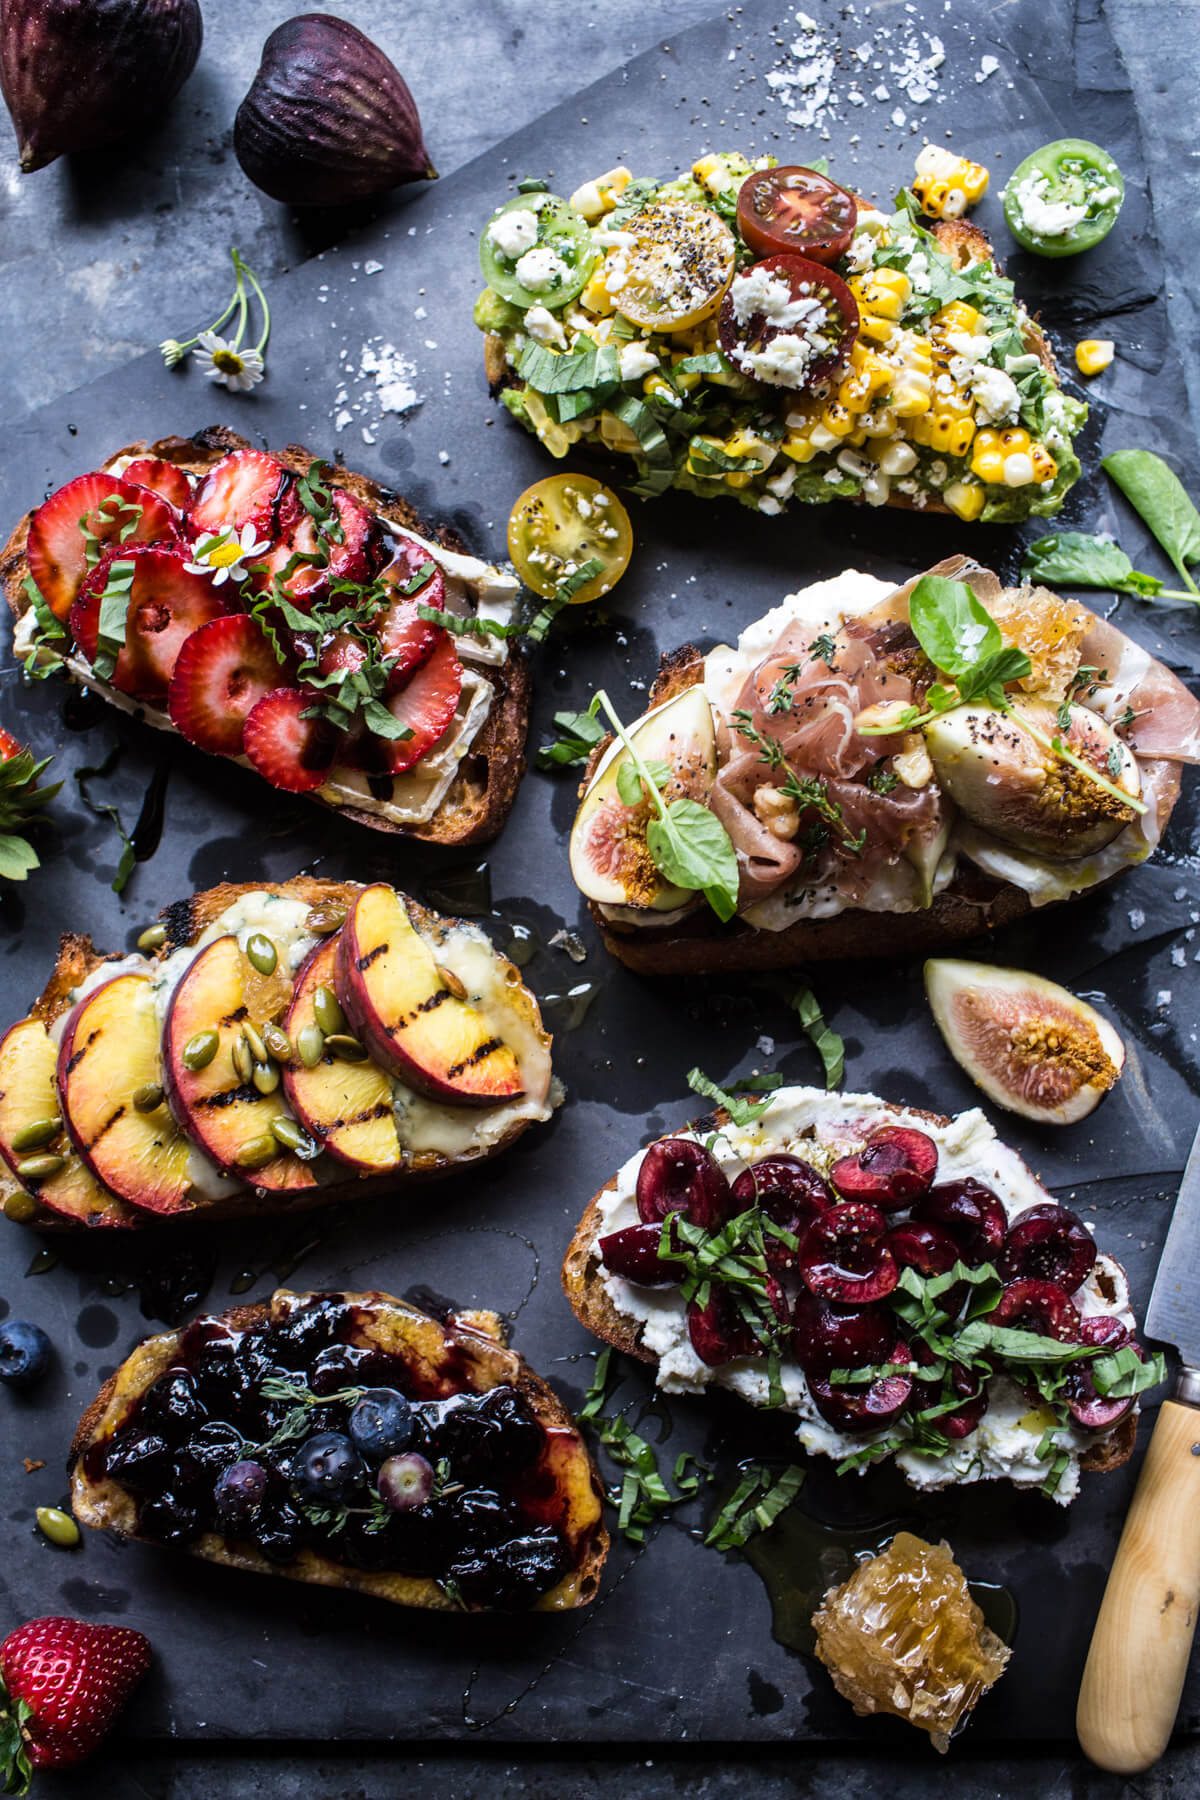 summer crostini 6 ways + 50 recipes for perfect for summer parties! | summer food, summer parties, summer recipes, summer appetizers, summer desserts, summer drinks, easy entertaining, entertaining tips |